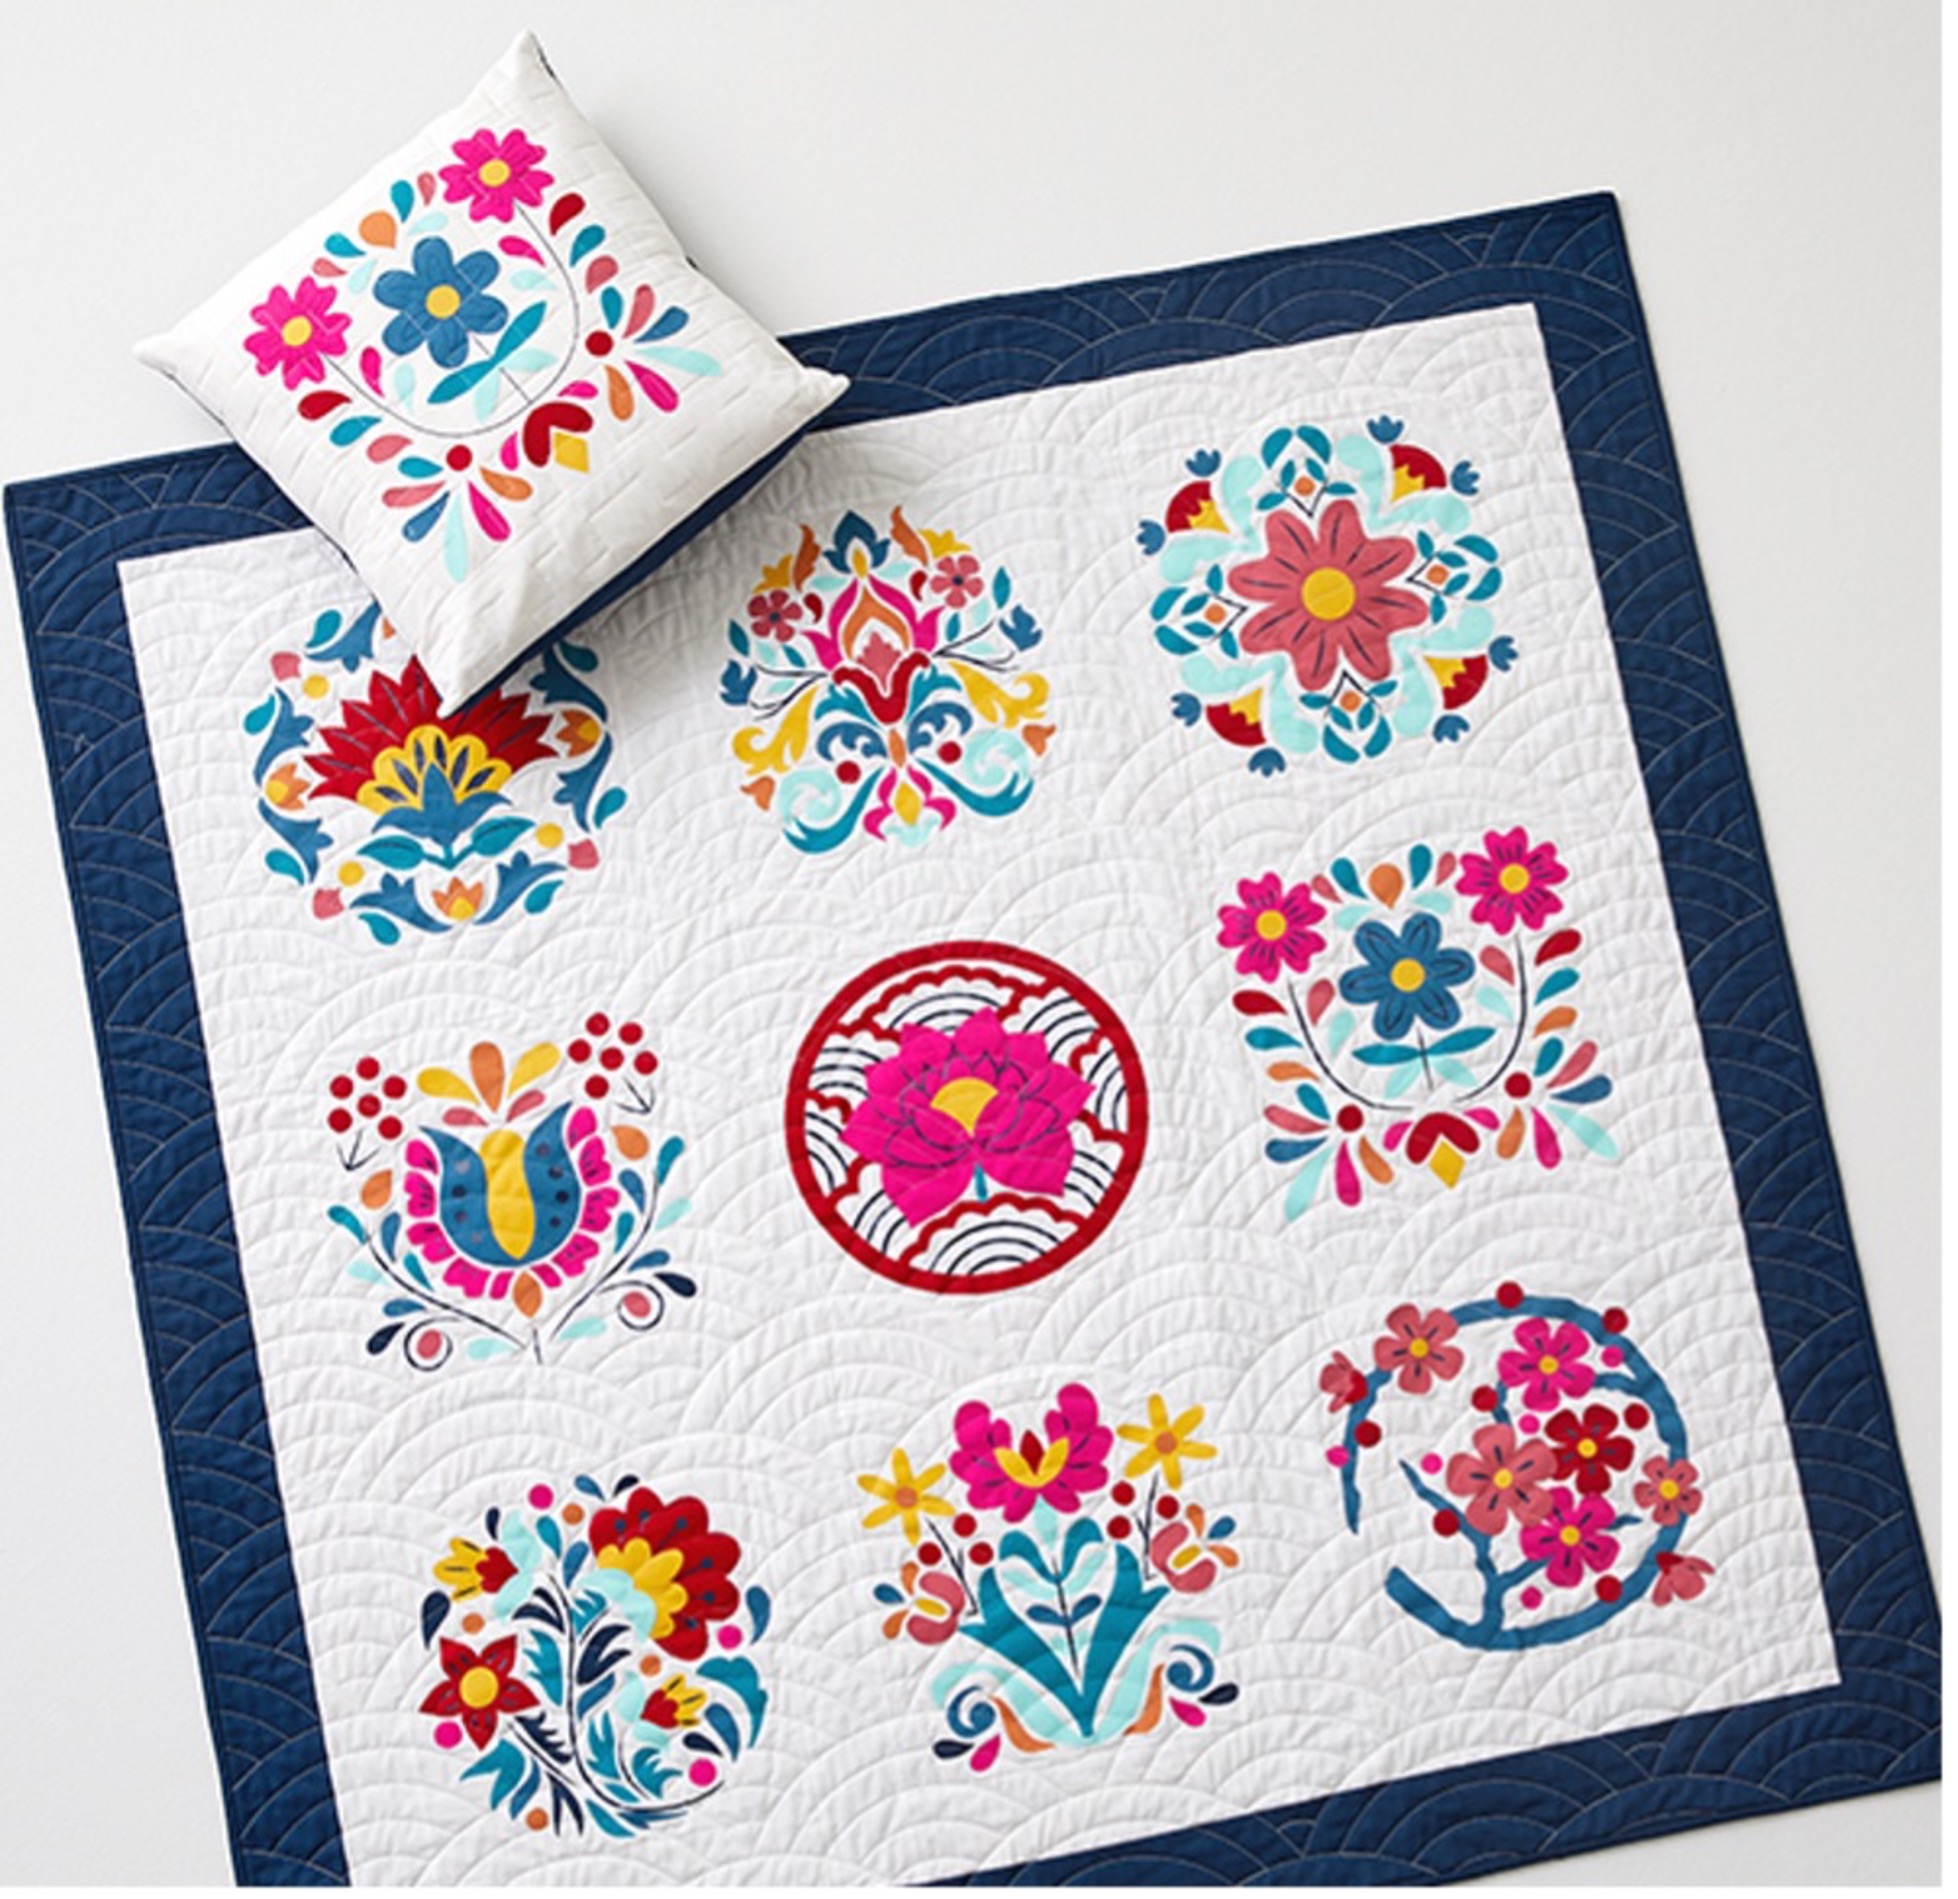 December Quilt Block of the Month:  Victorian England